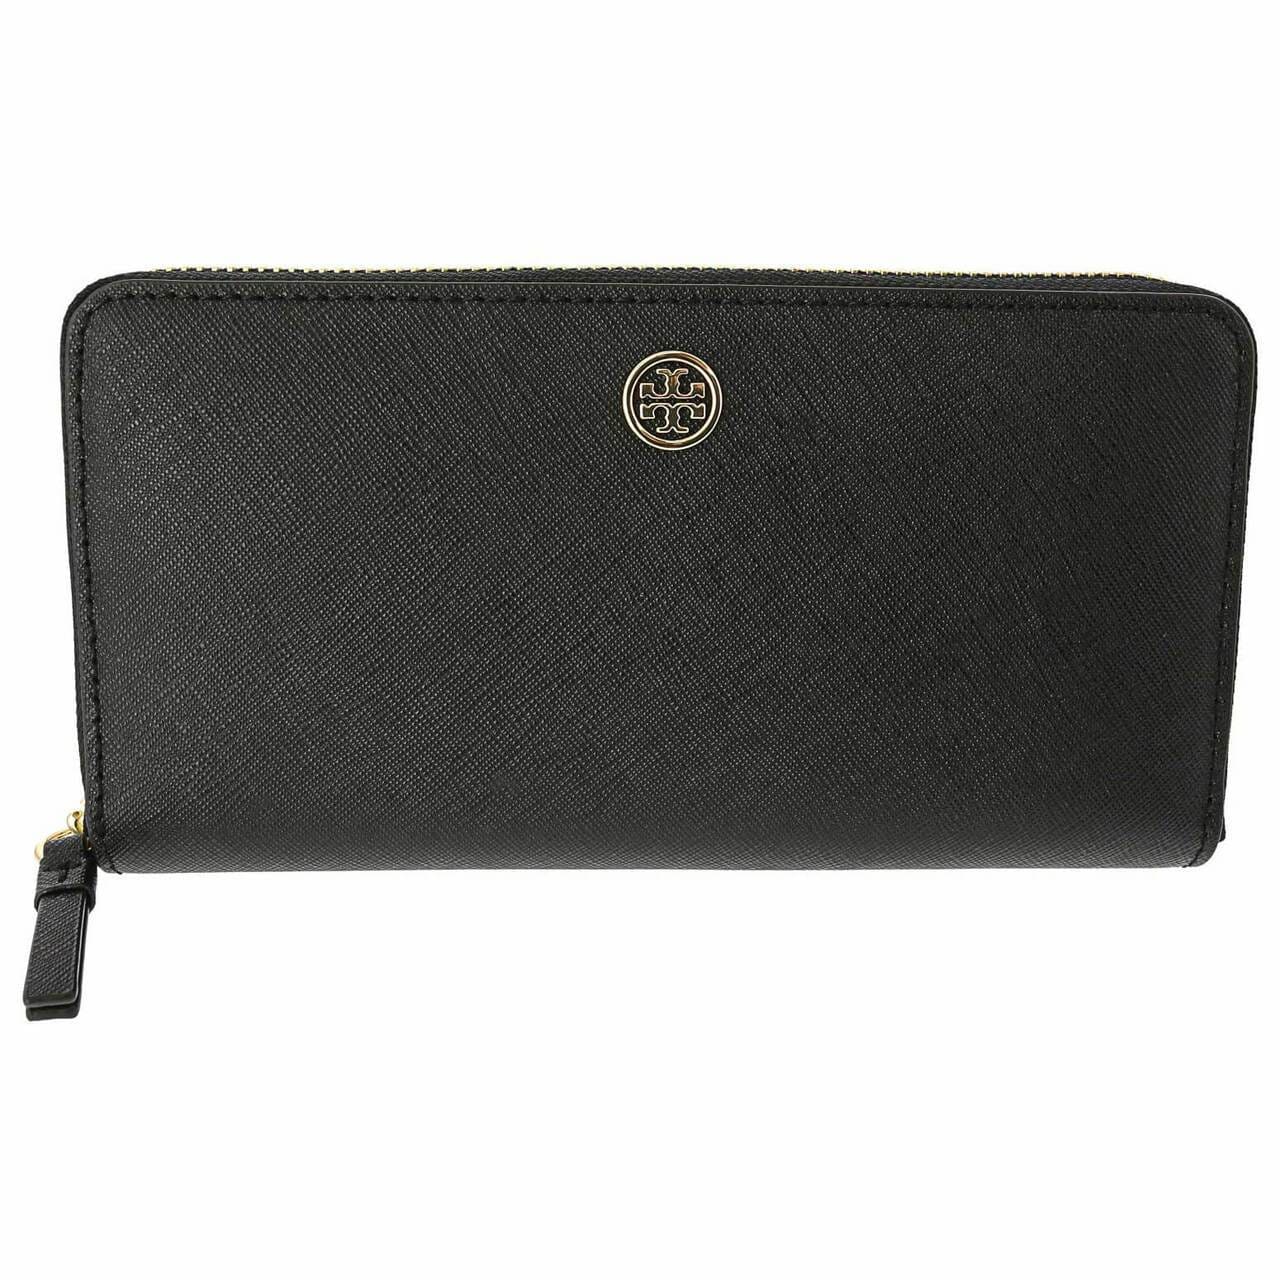 Tory Burch Robinson Zip Continental Black Leather Wallet TB 54448-001 192485105797